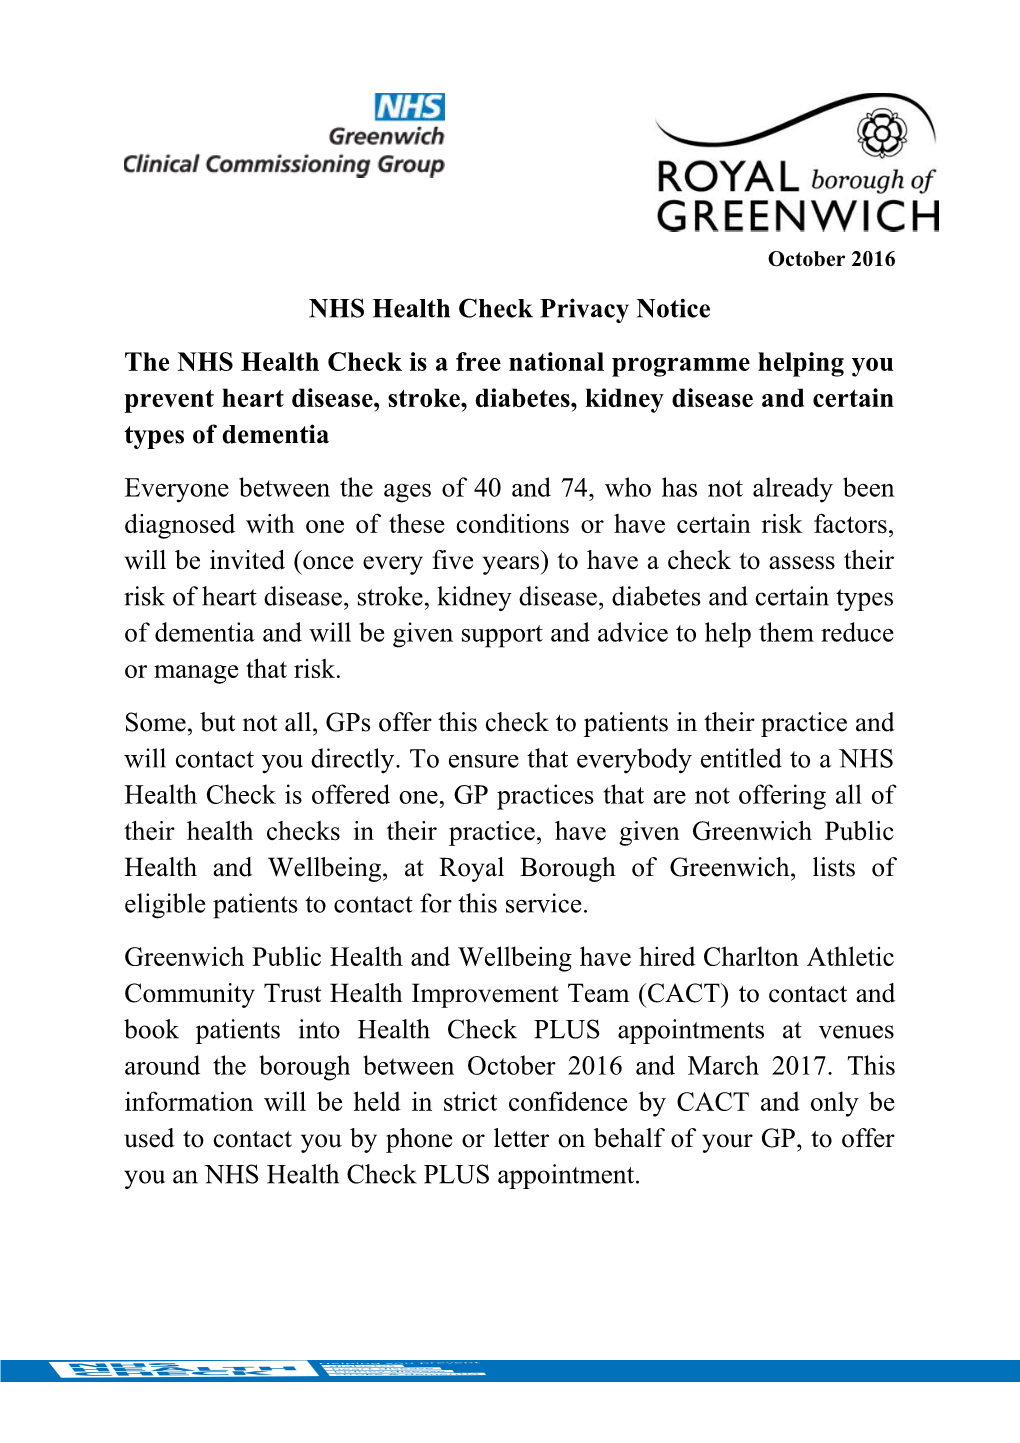 NHS Health Check Privacy Notice